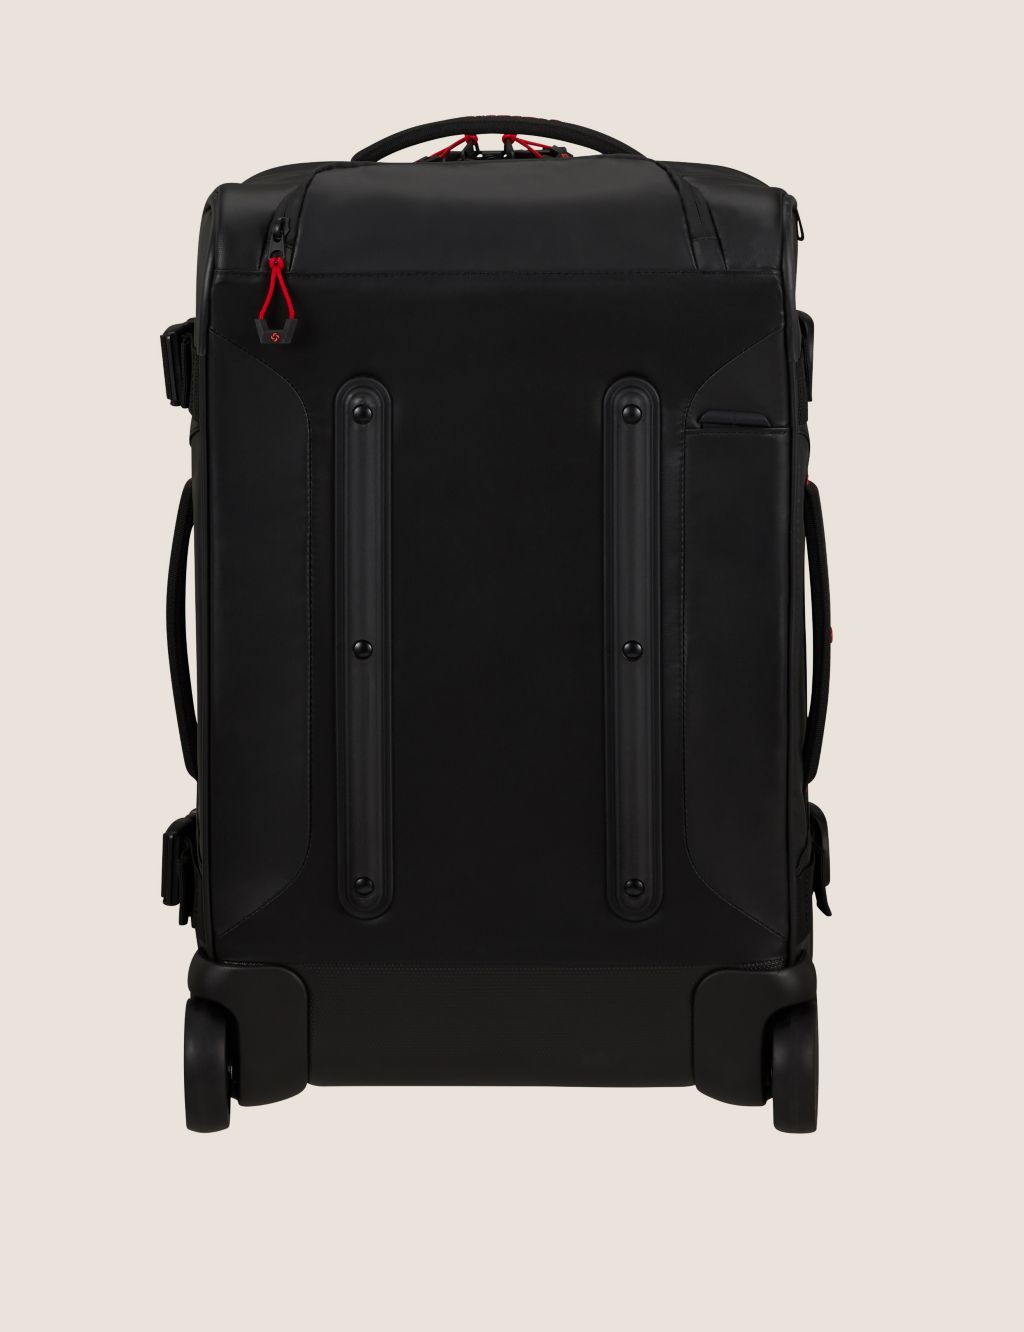 Ecodiver 2 Wheel Double Frame Cabin Suitcase image 2